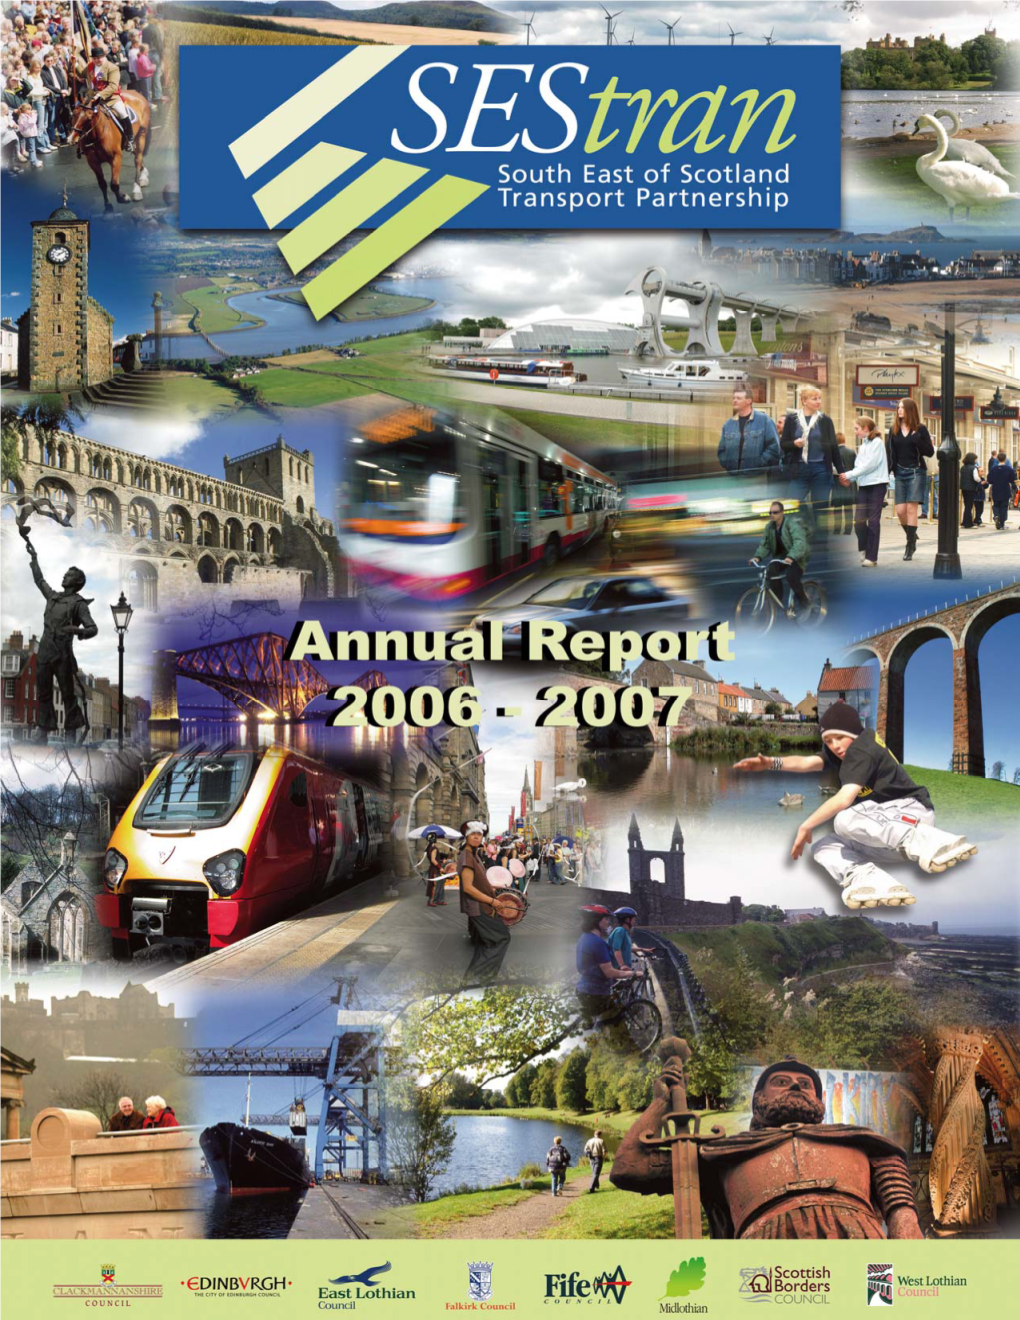 Annual Report to Be Submitted to Scottish Ministers